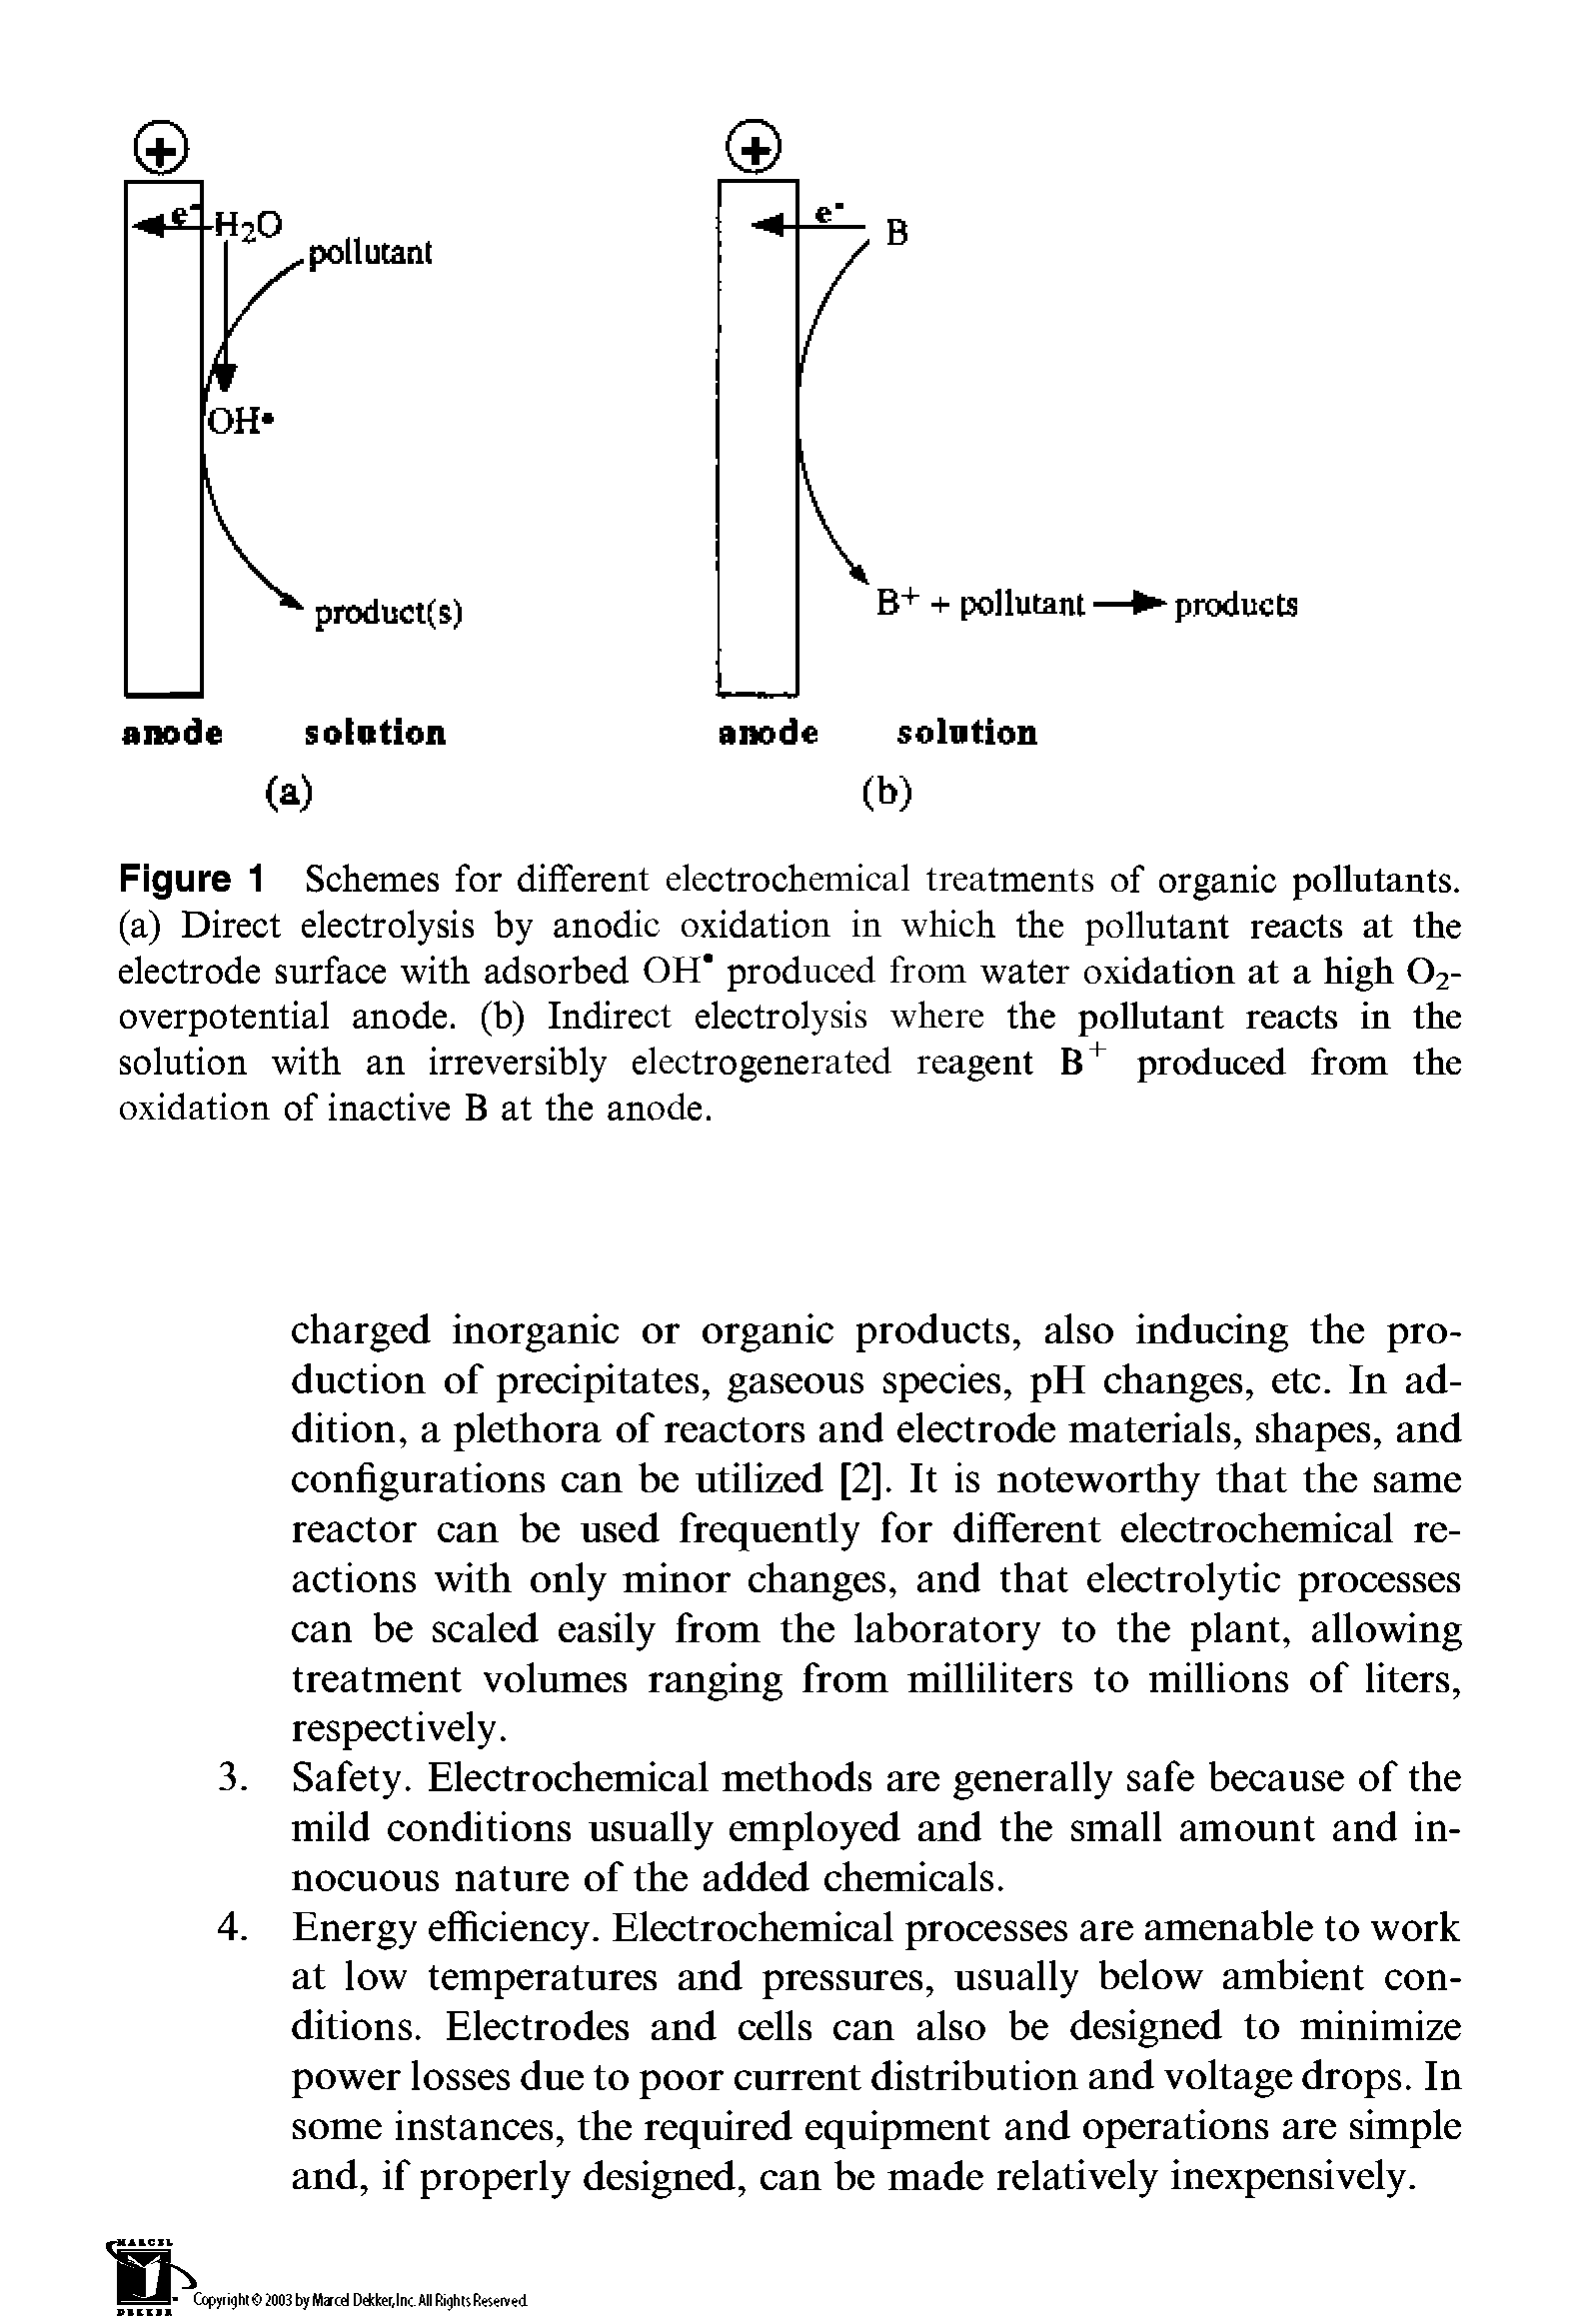 Figure 1 Schemes for different electrochemical treatments of organic pollutants, (a) Direct electrolysis by anodic oxidation in which the pollutant reacts at the electrode surface with adsorbed OH" produced from water oxidation at a high 02-overpotential anode, (b) Indirect electrolysis where the pollutant reacts in the solution with an irreversibly electrogenerated reagent B+ produced from the oxidation of inactive B at the anode.